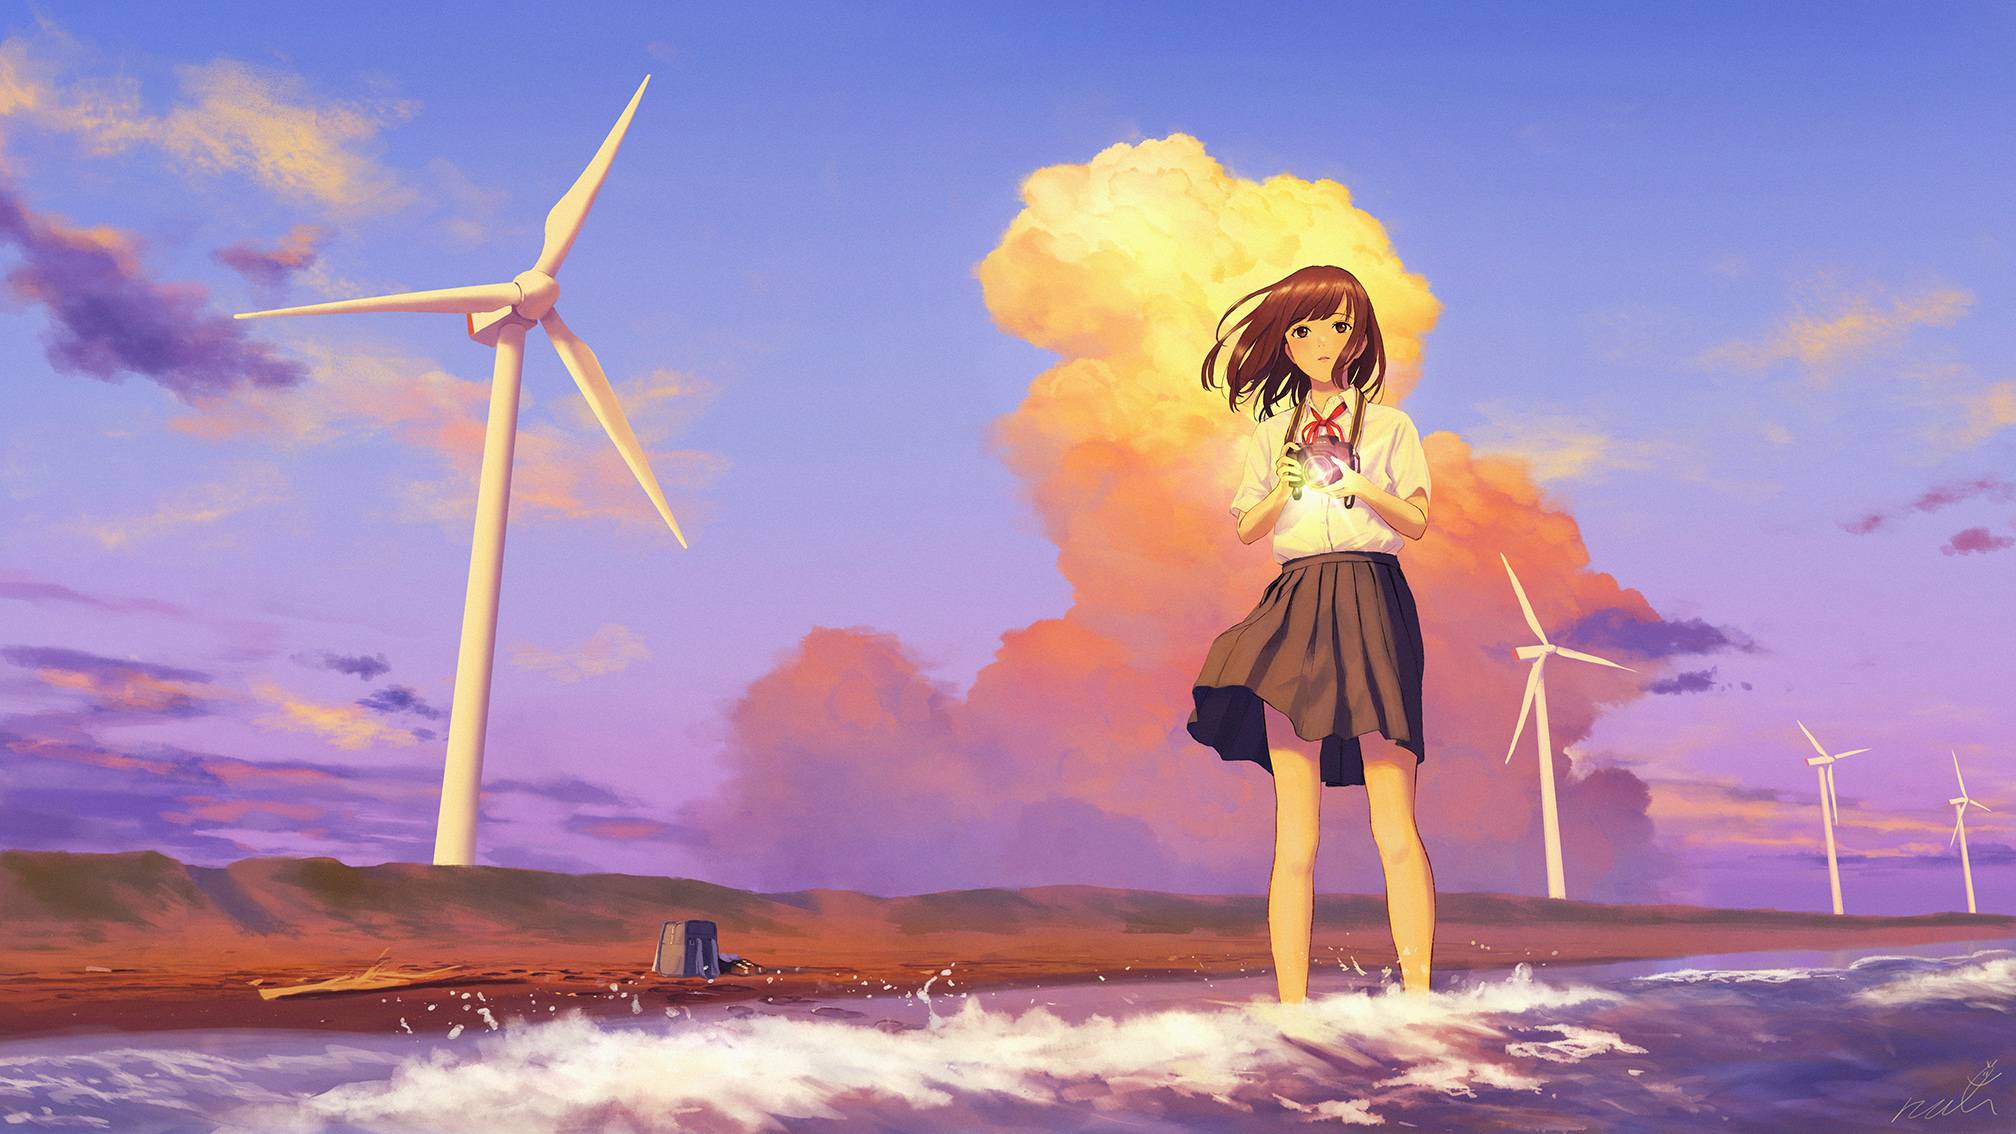 A woman standing in the water with windmills behind her - Anime, farm, HD, anime girl